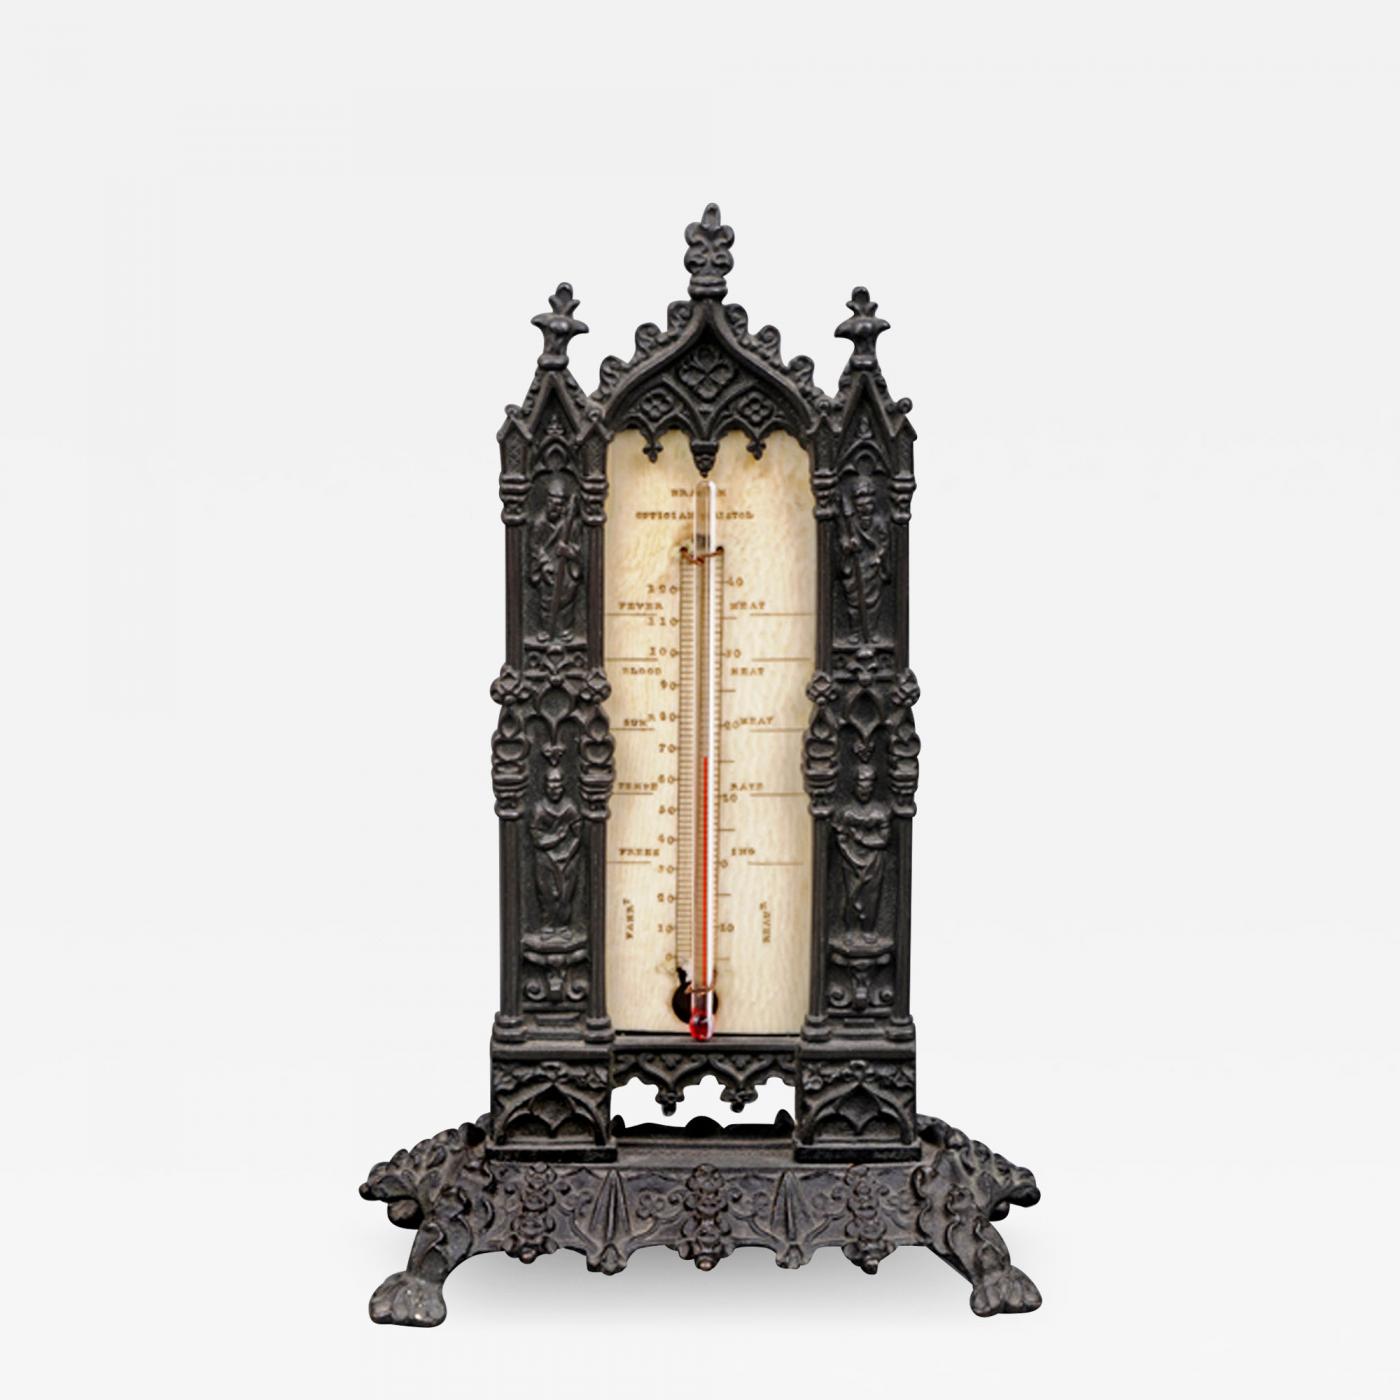 https://cdn.incollect.com/sites/default/files/zoom/B-Day-Bronze-Desk-Thermometer-Circa-1828-453180-1933016.jpg